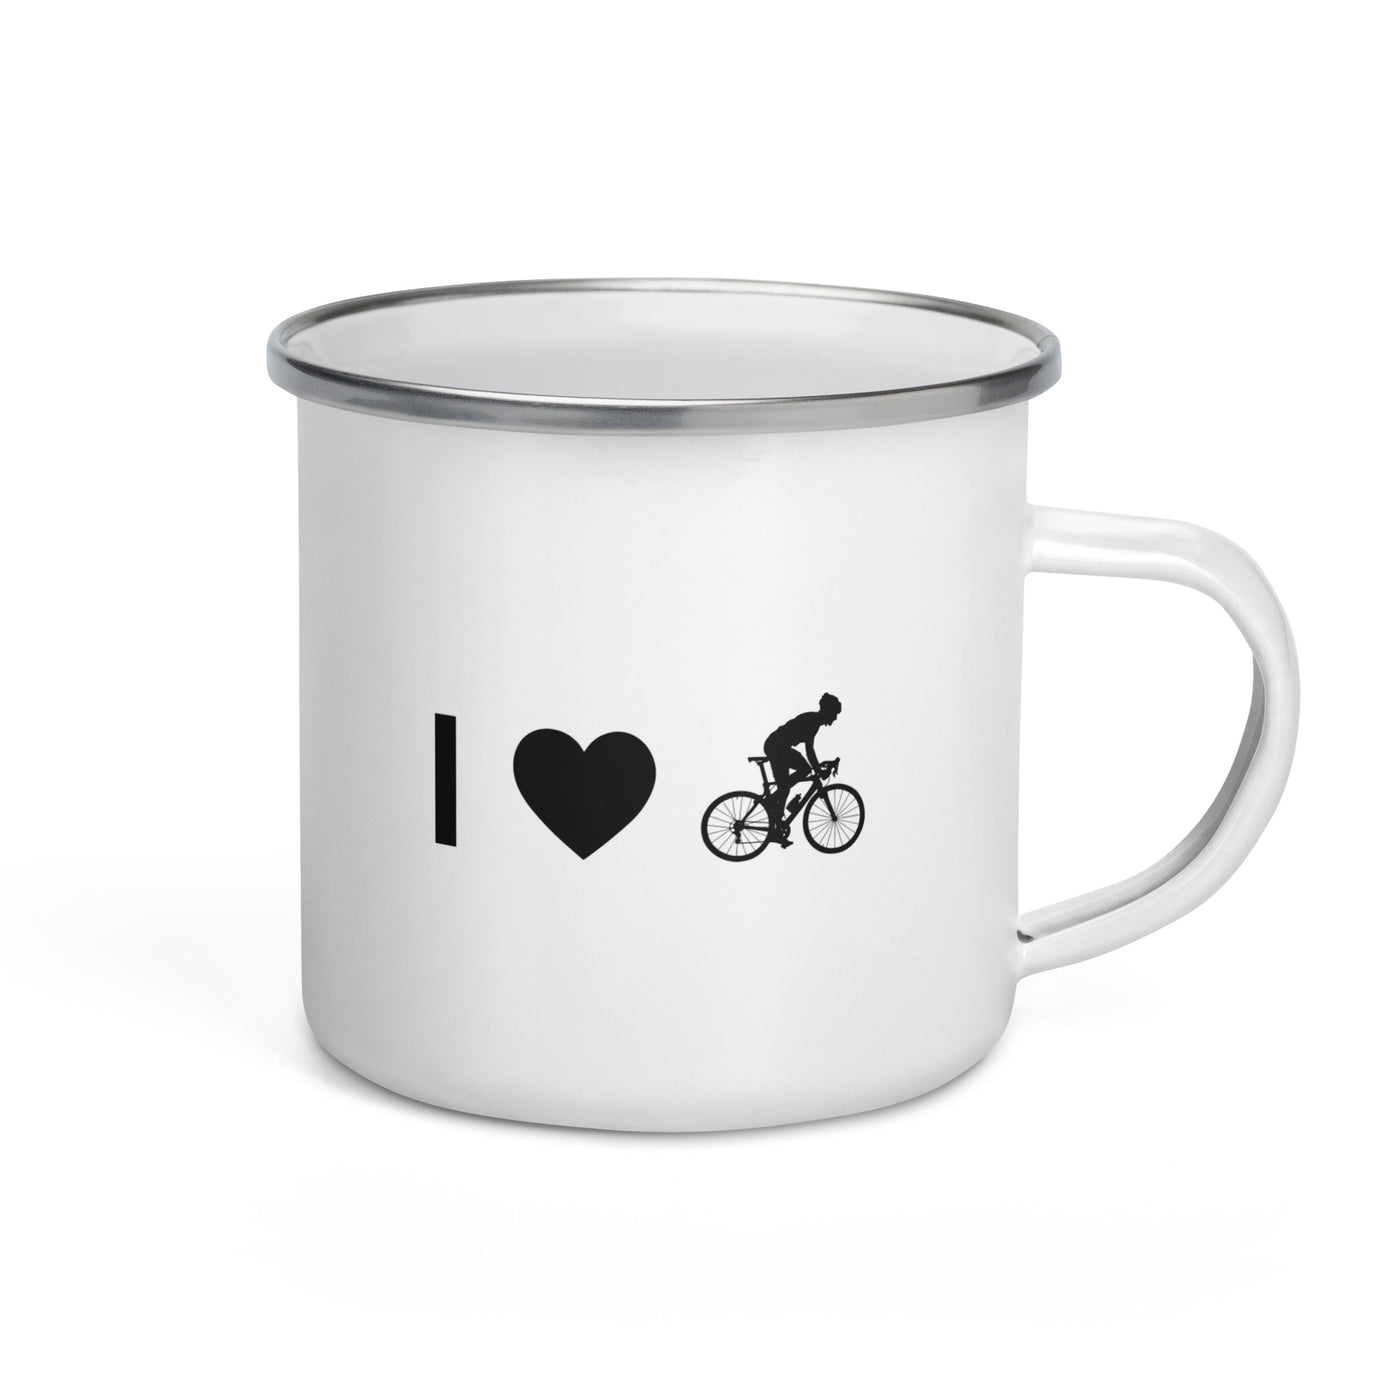 I Heart And Guy Cycling - Emaille Tasse fahrrad Default Title